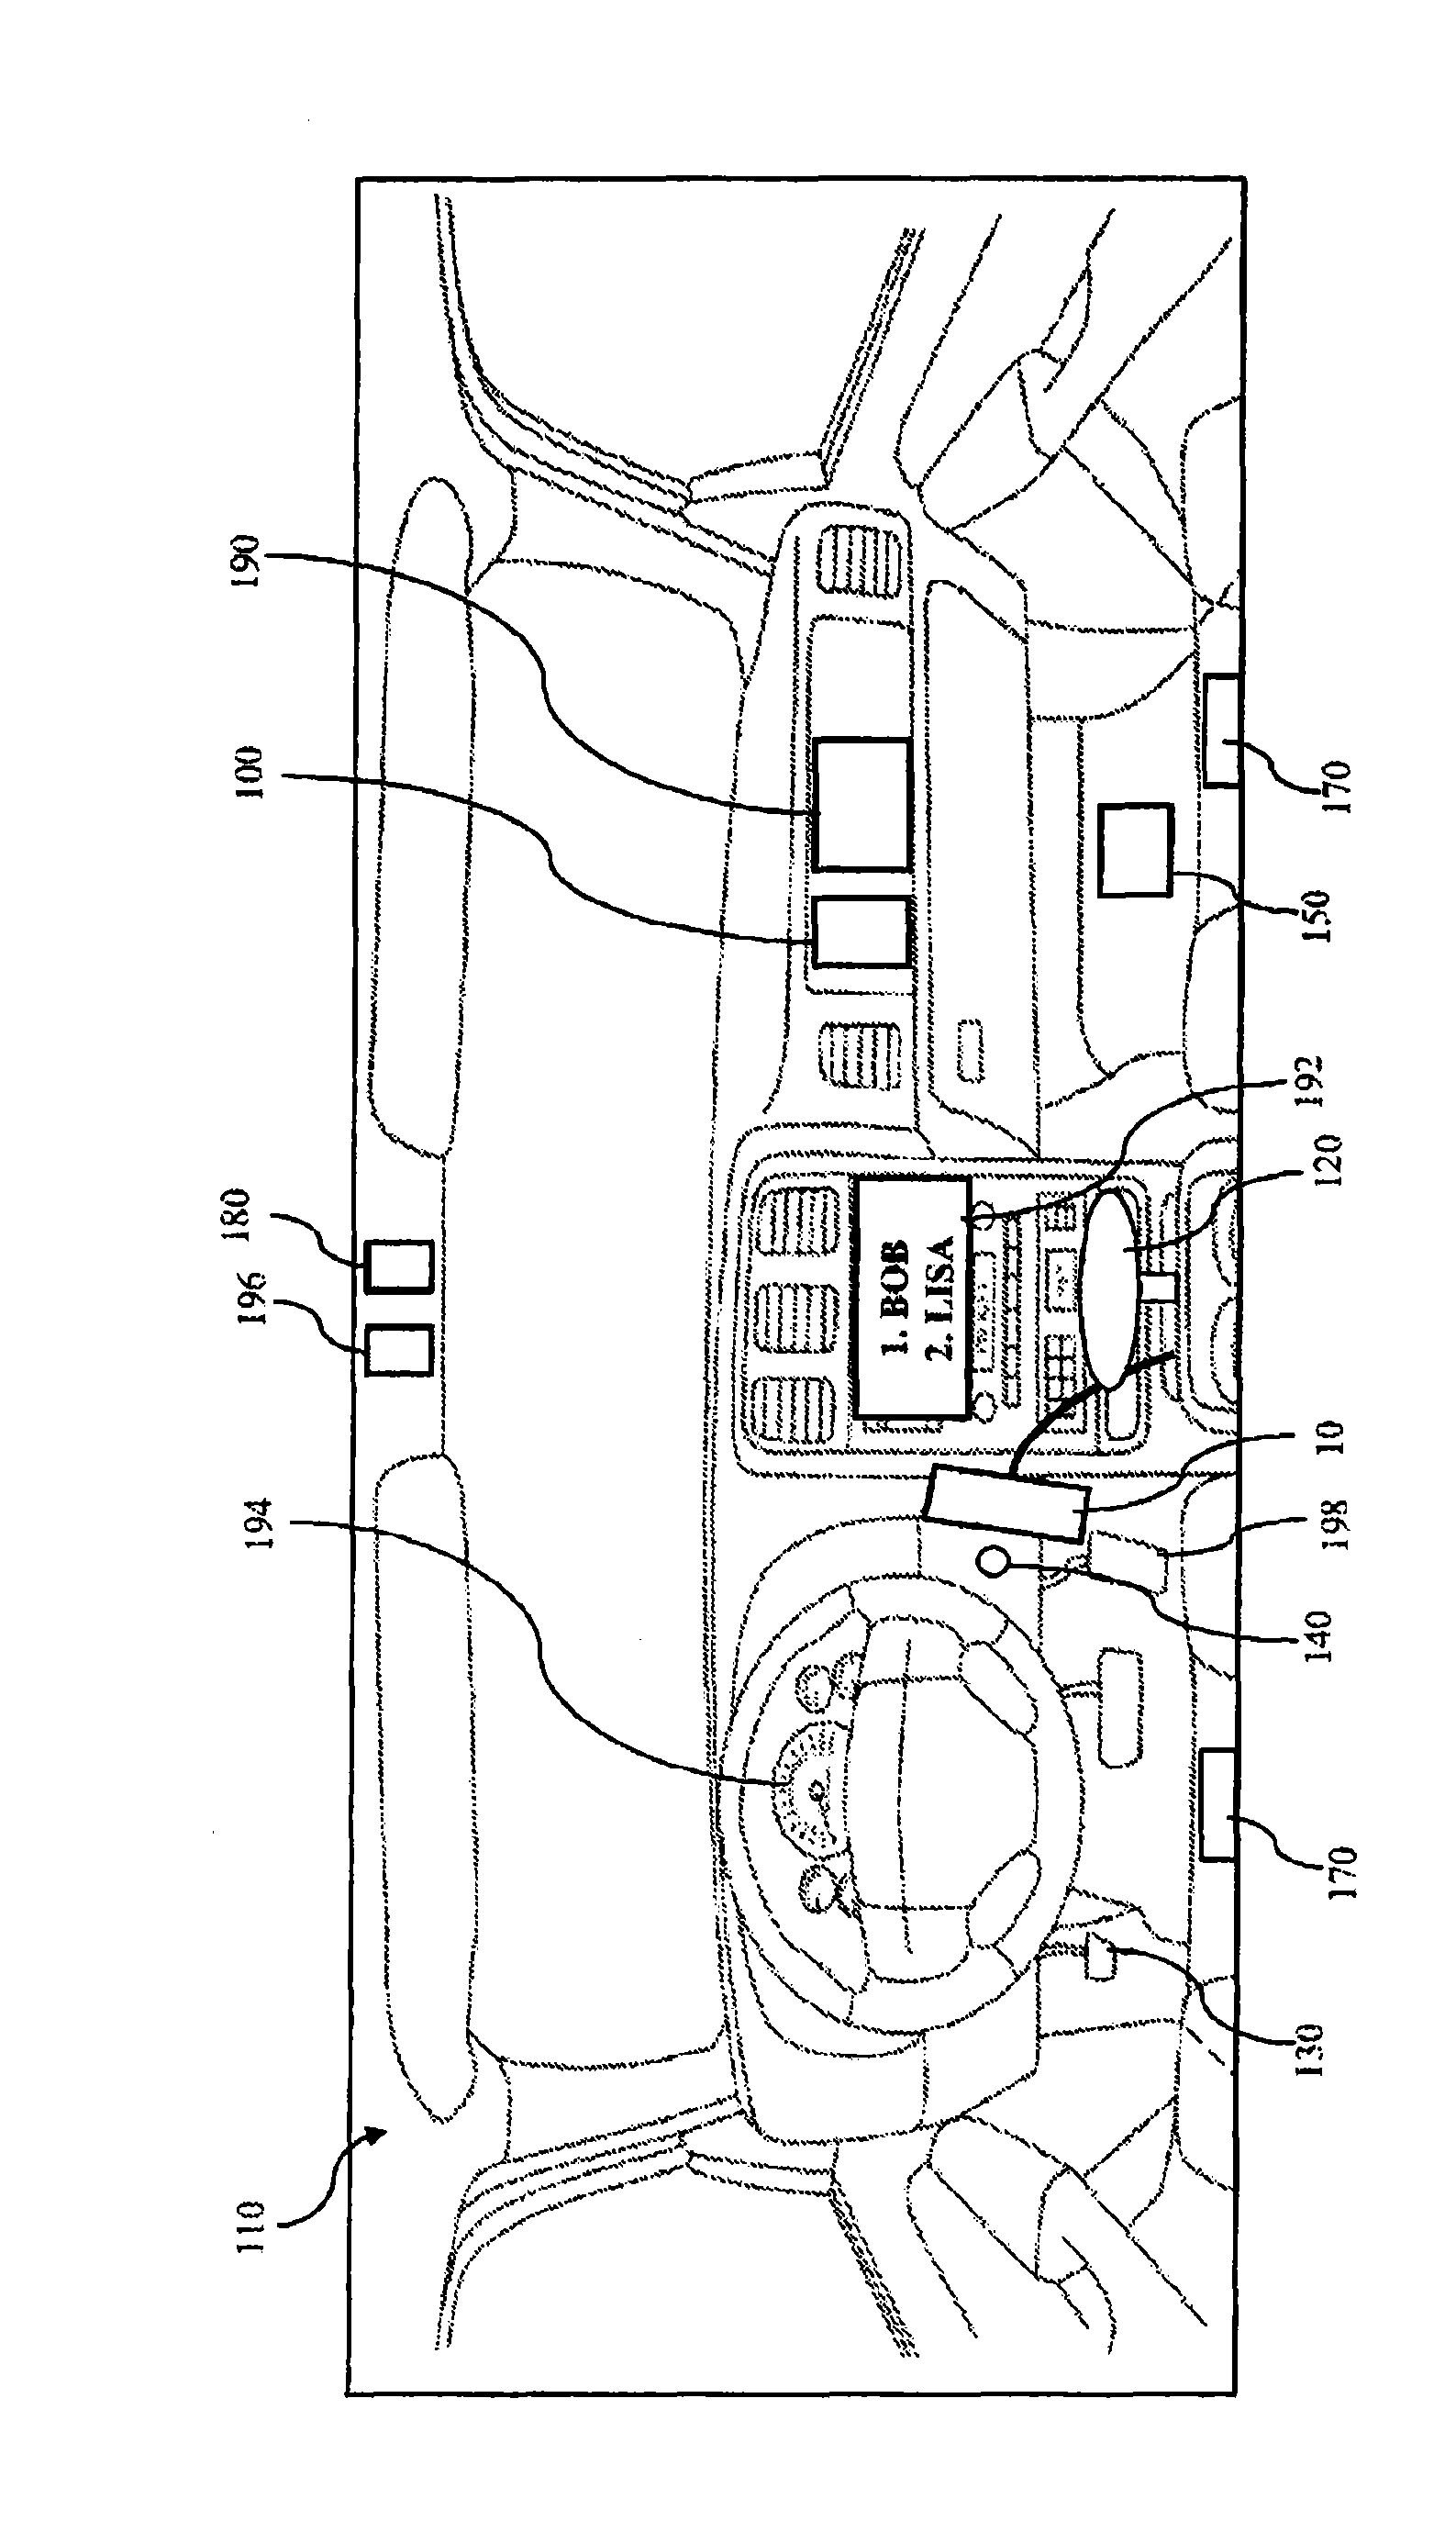 System and method for restricting driver mobile device feature usage while vehicle is in motion